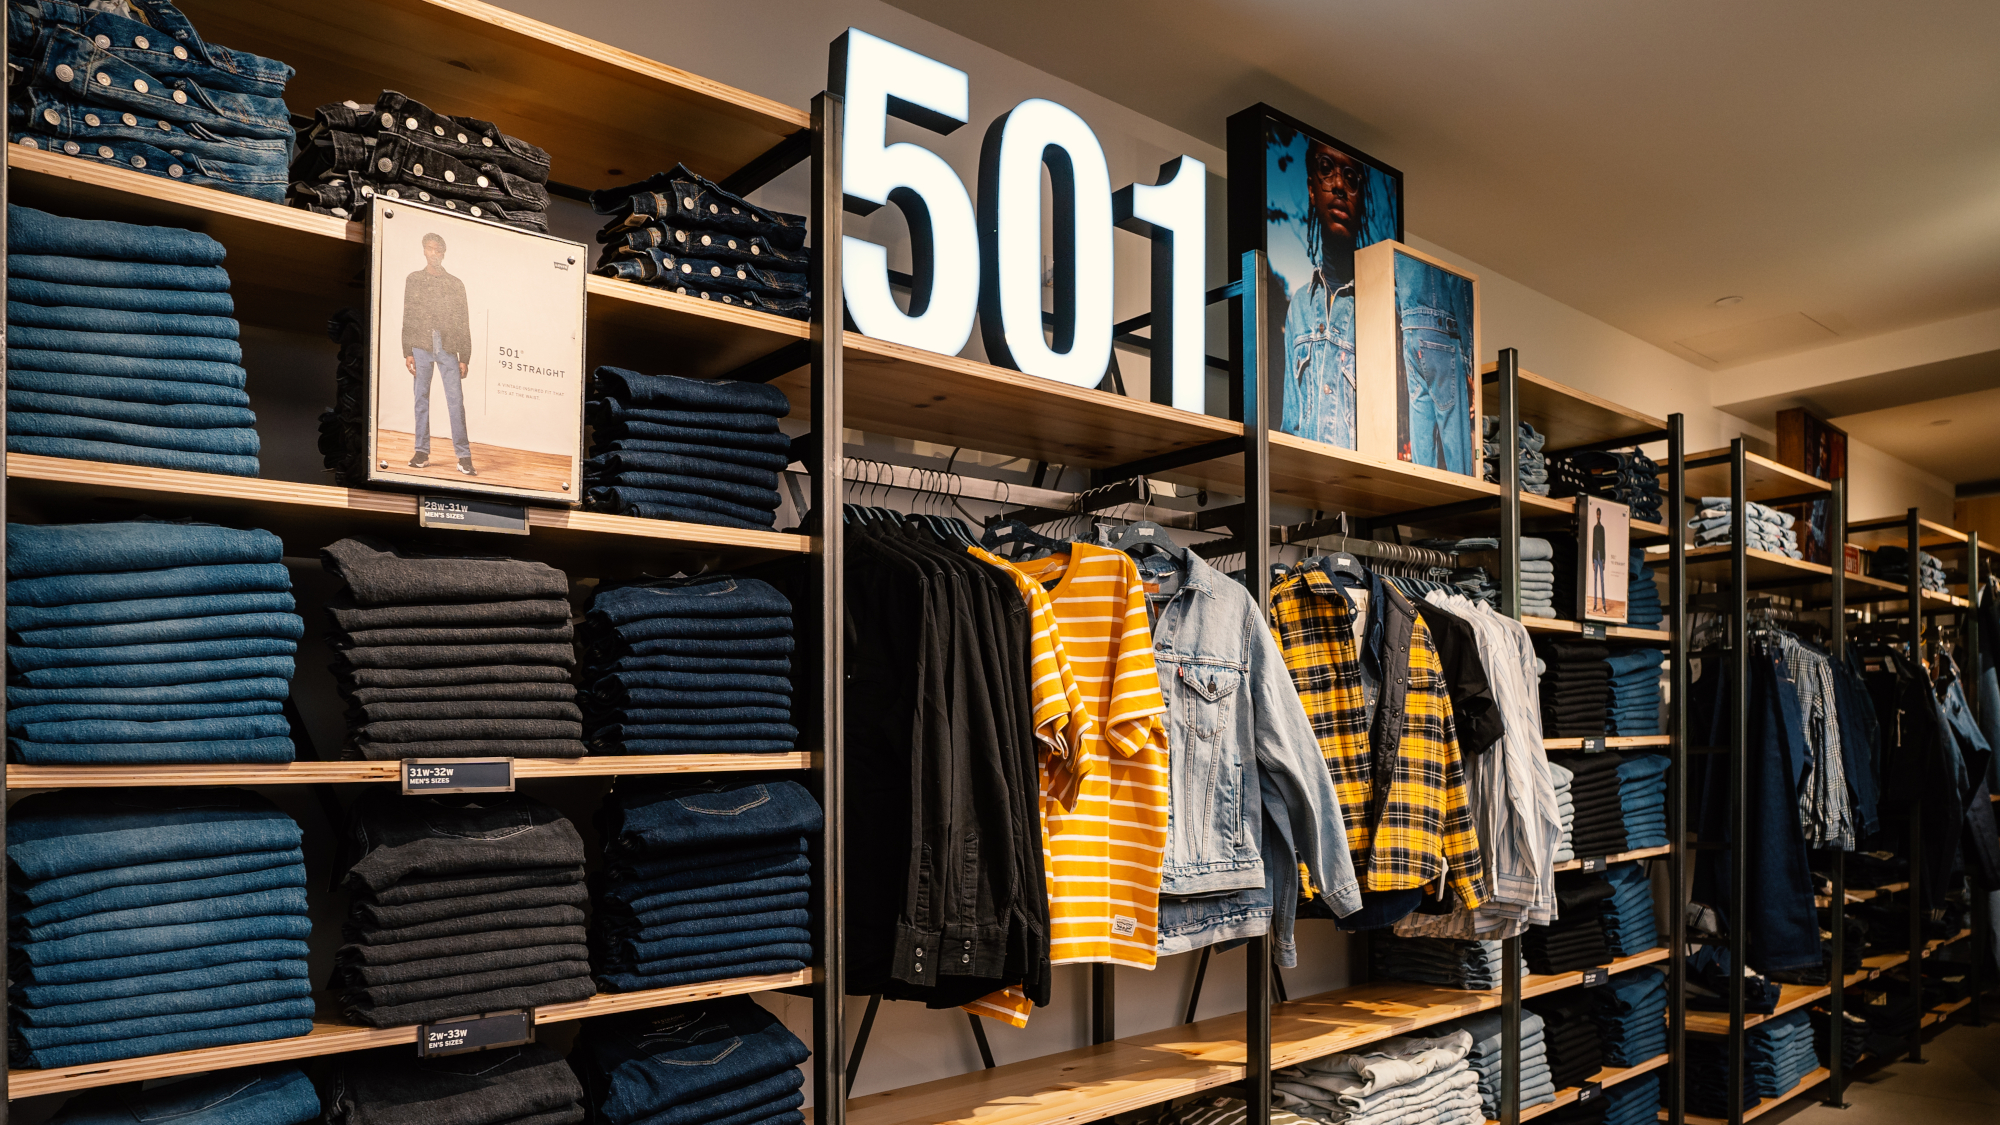 Jeans and other items on shelves inside Levi's store